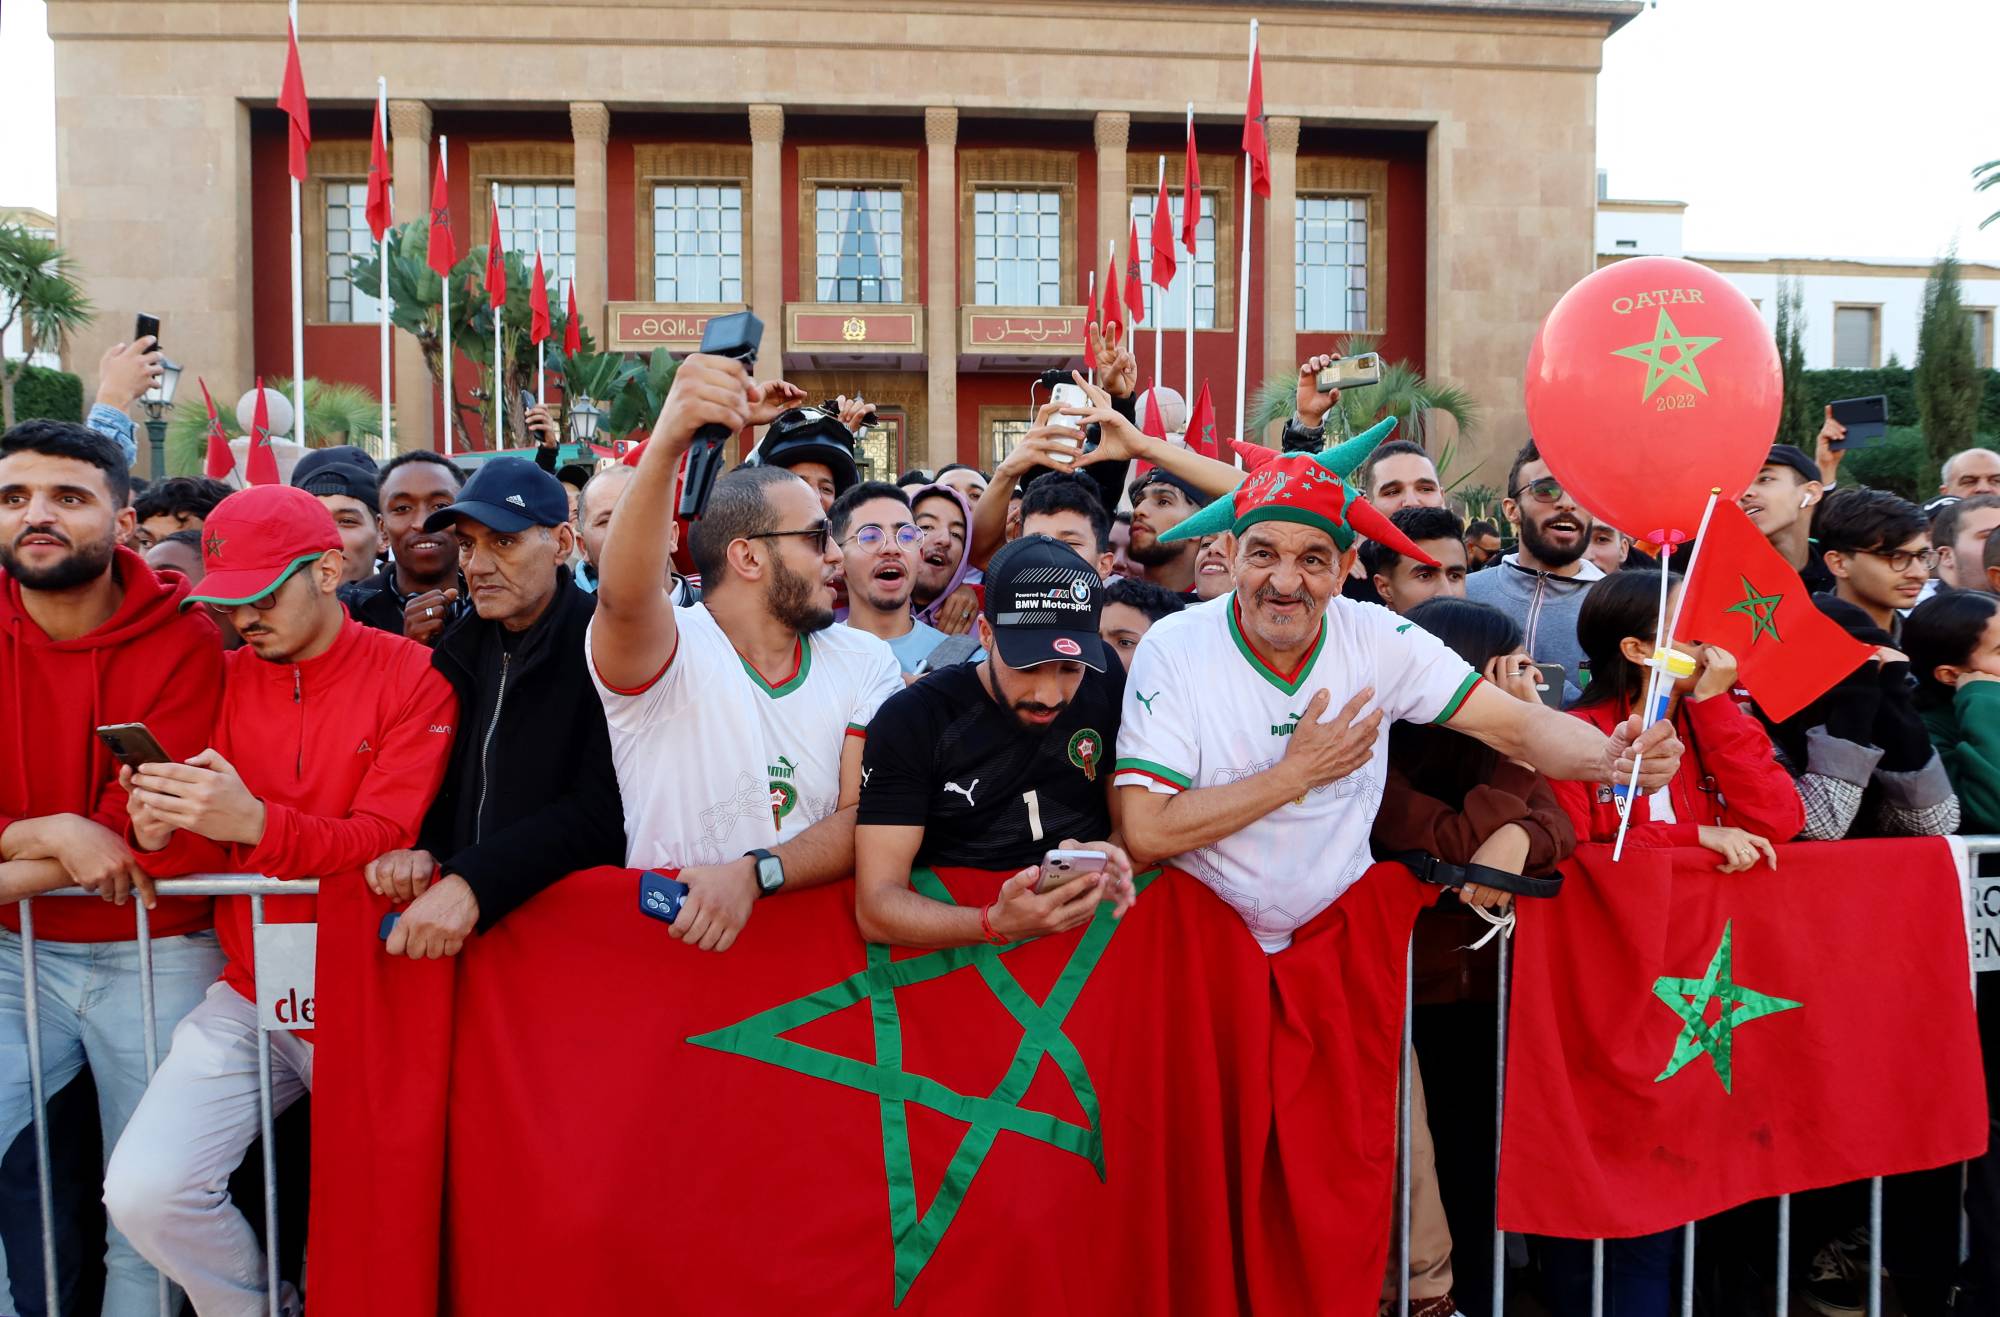 Morocco hopes to co-host the 2030 FIFA World Cup after coming up short in five previous bid attempts. | REUTERS